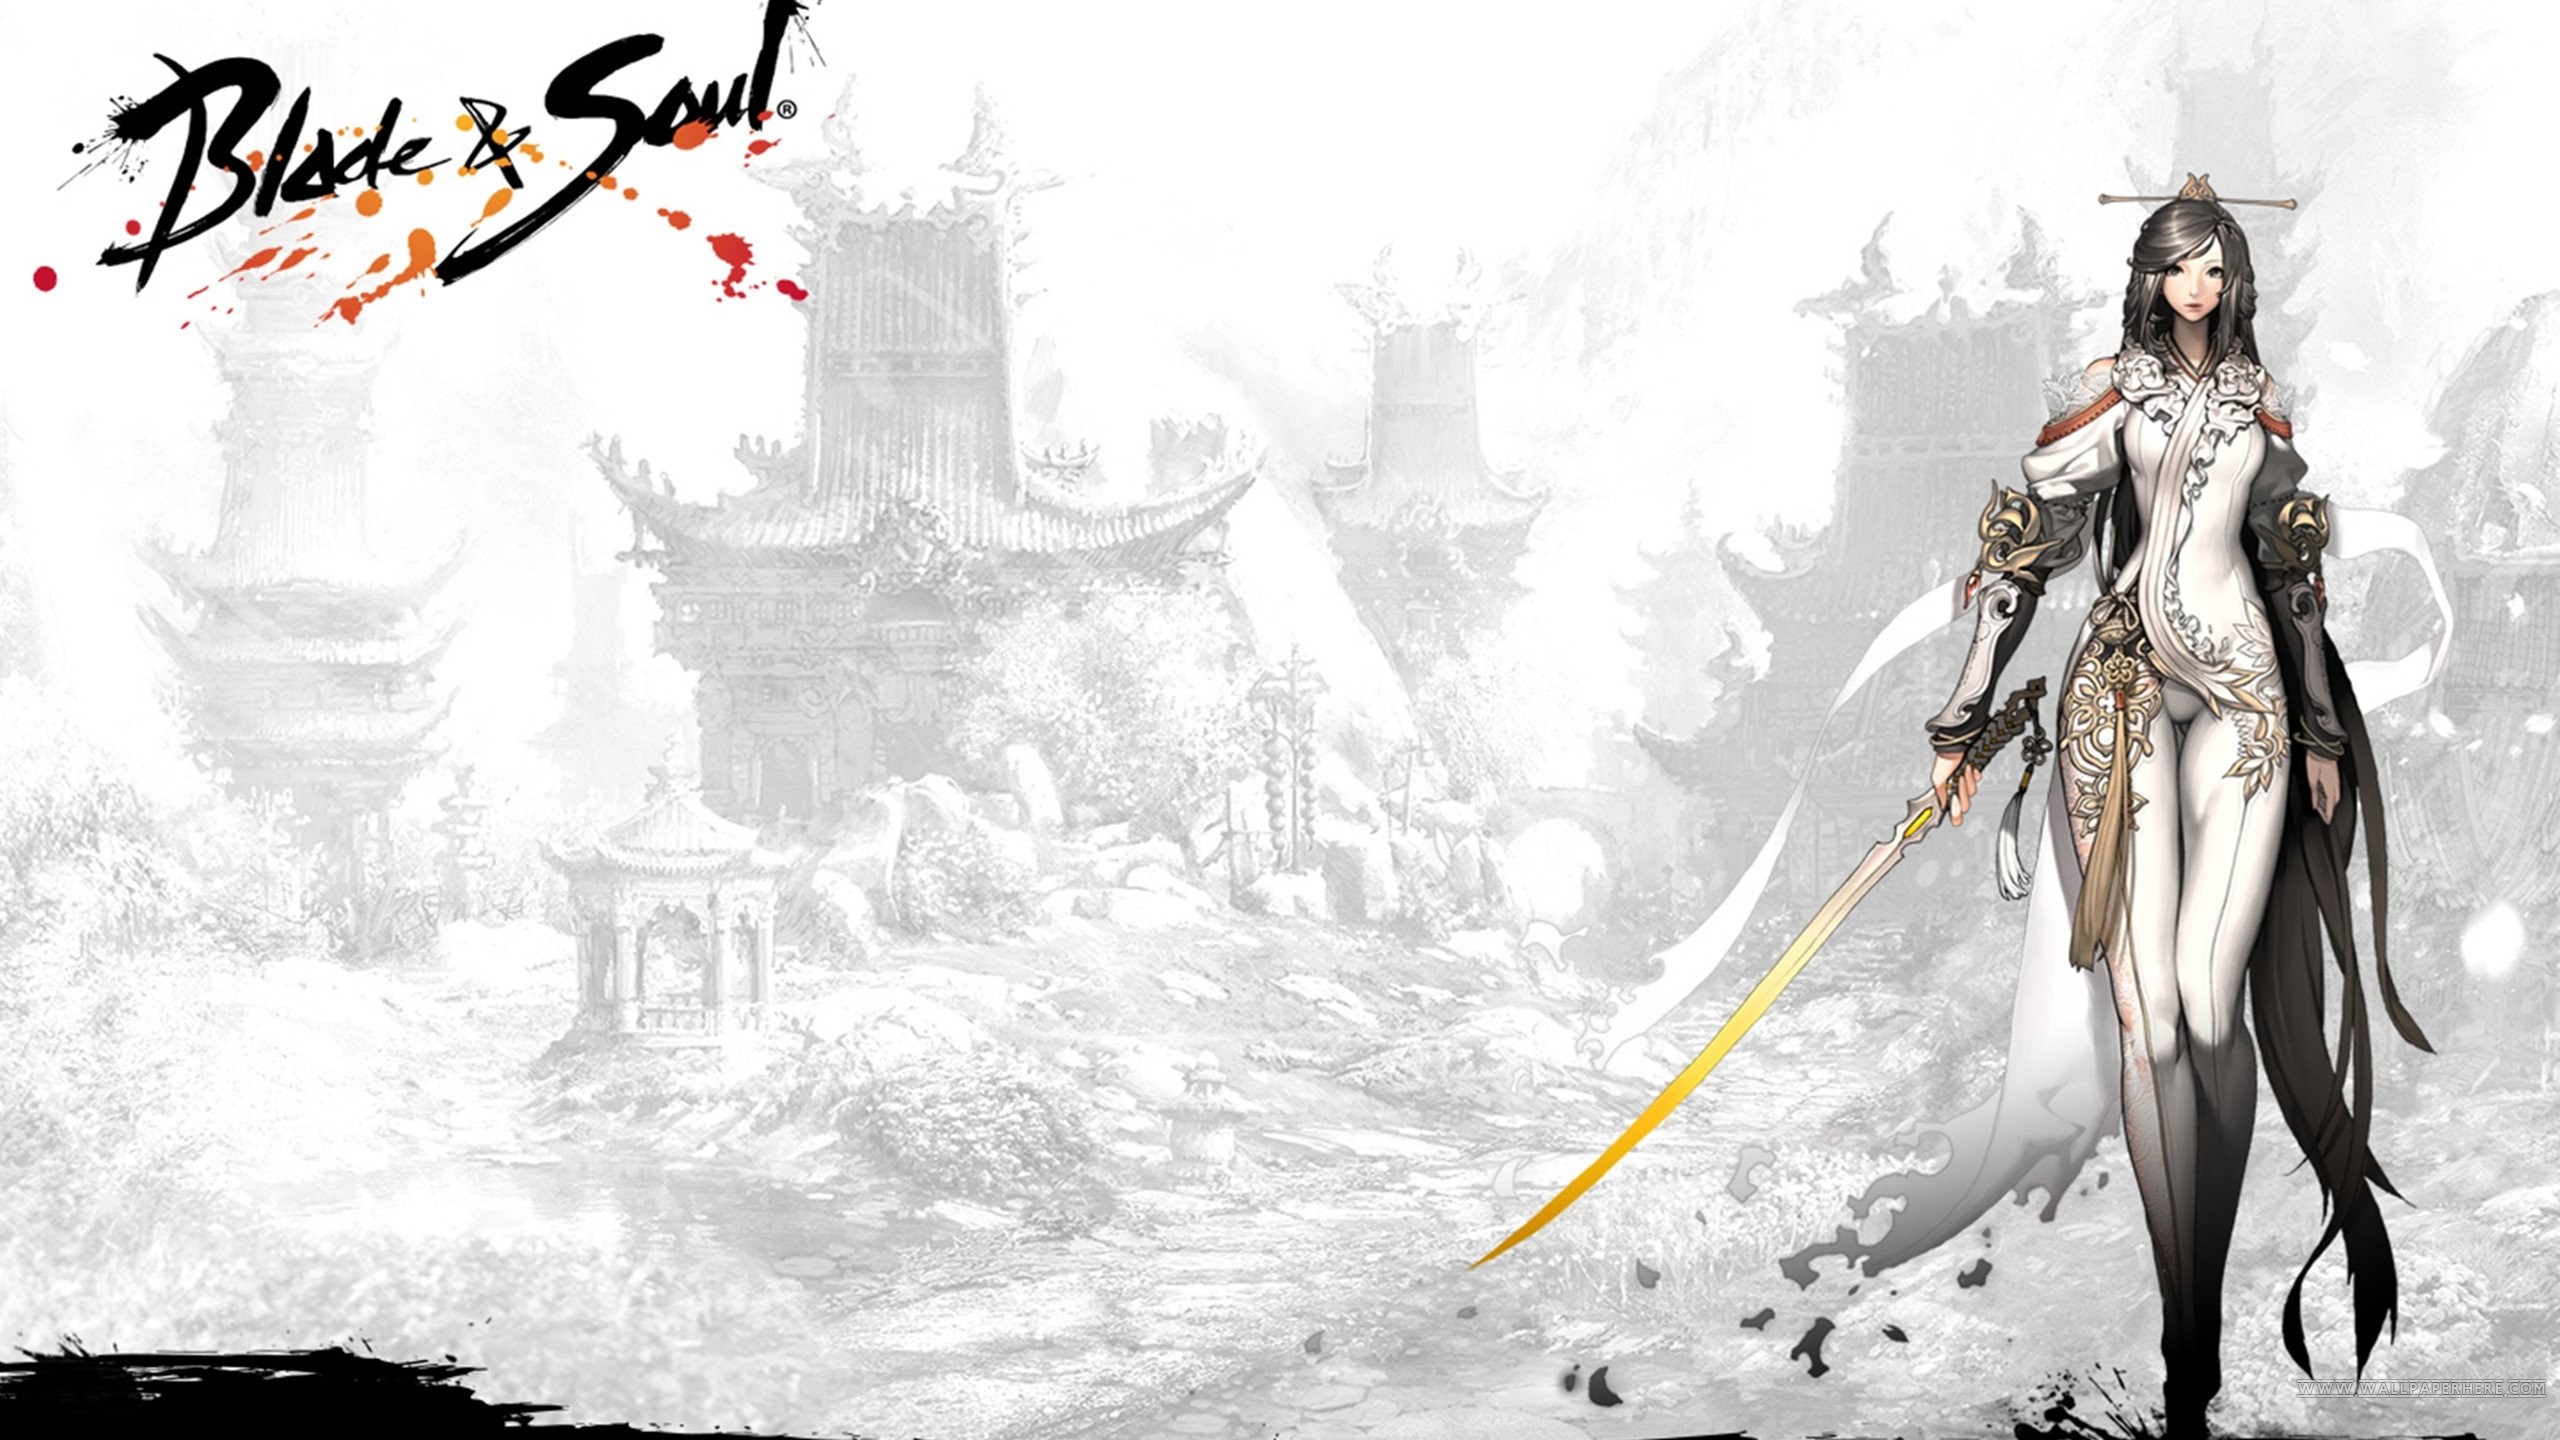 Wallpaper.wiki Blade and Soul Background HD PIC